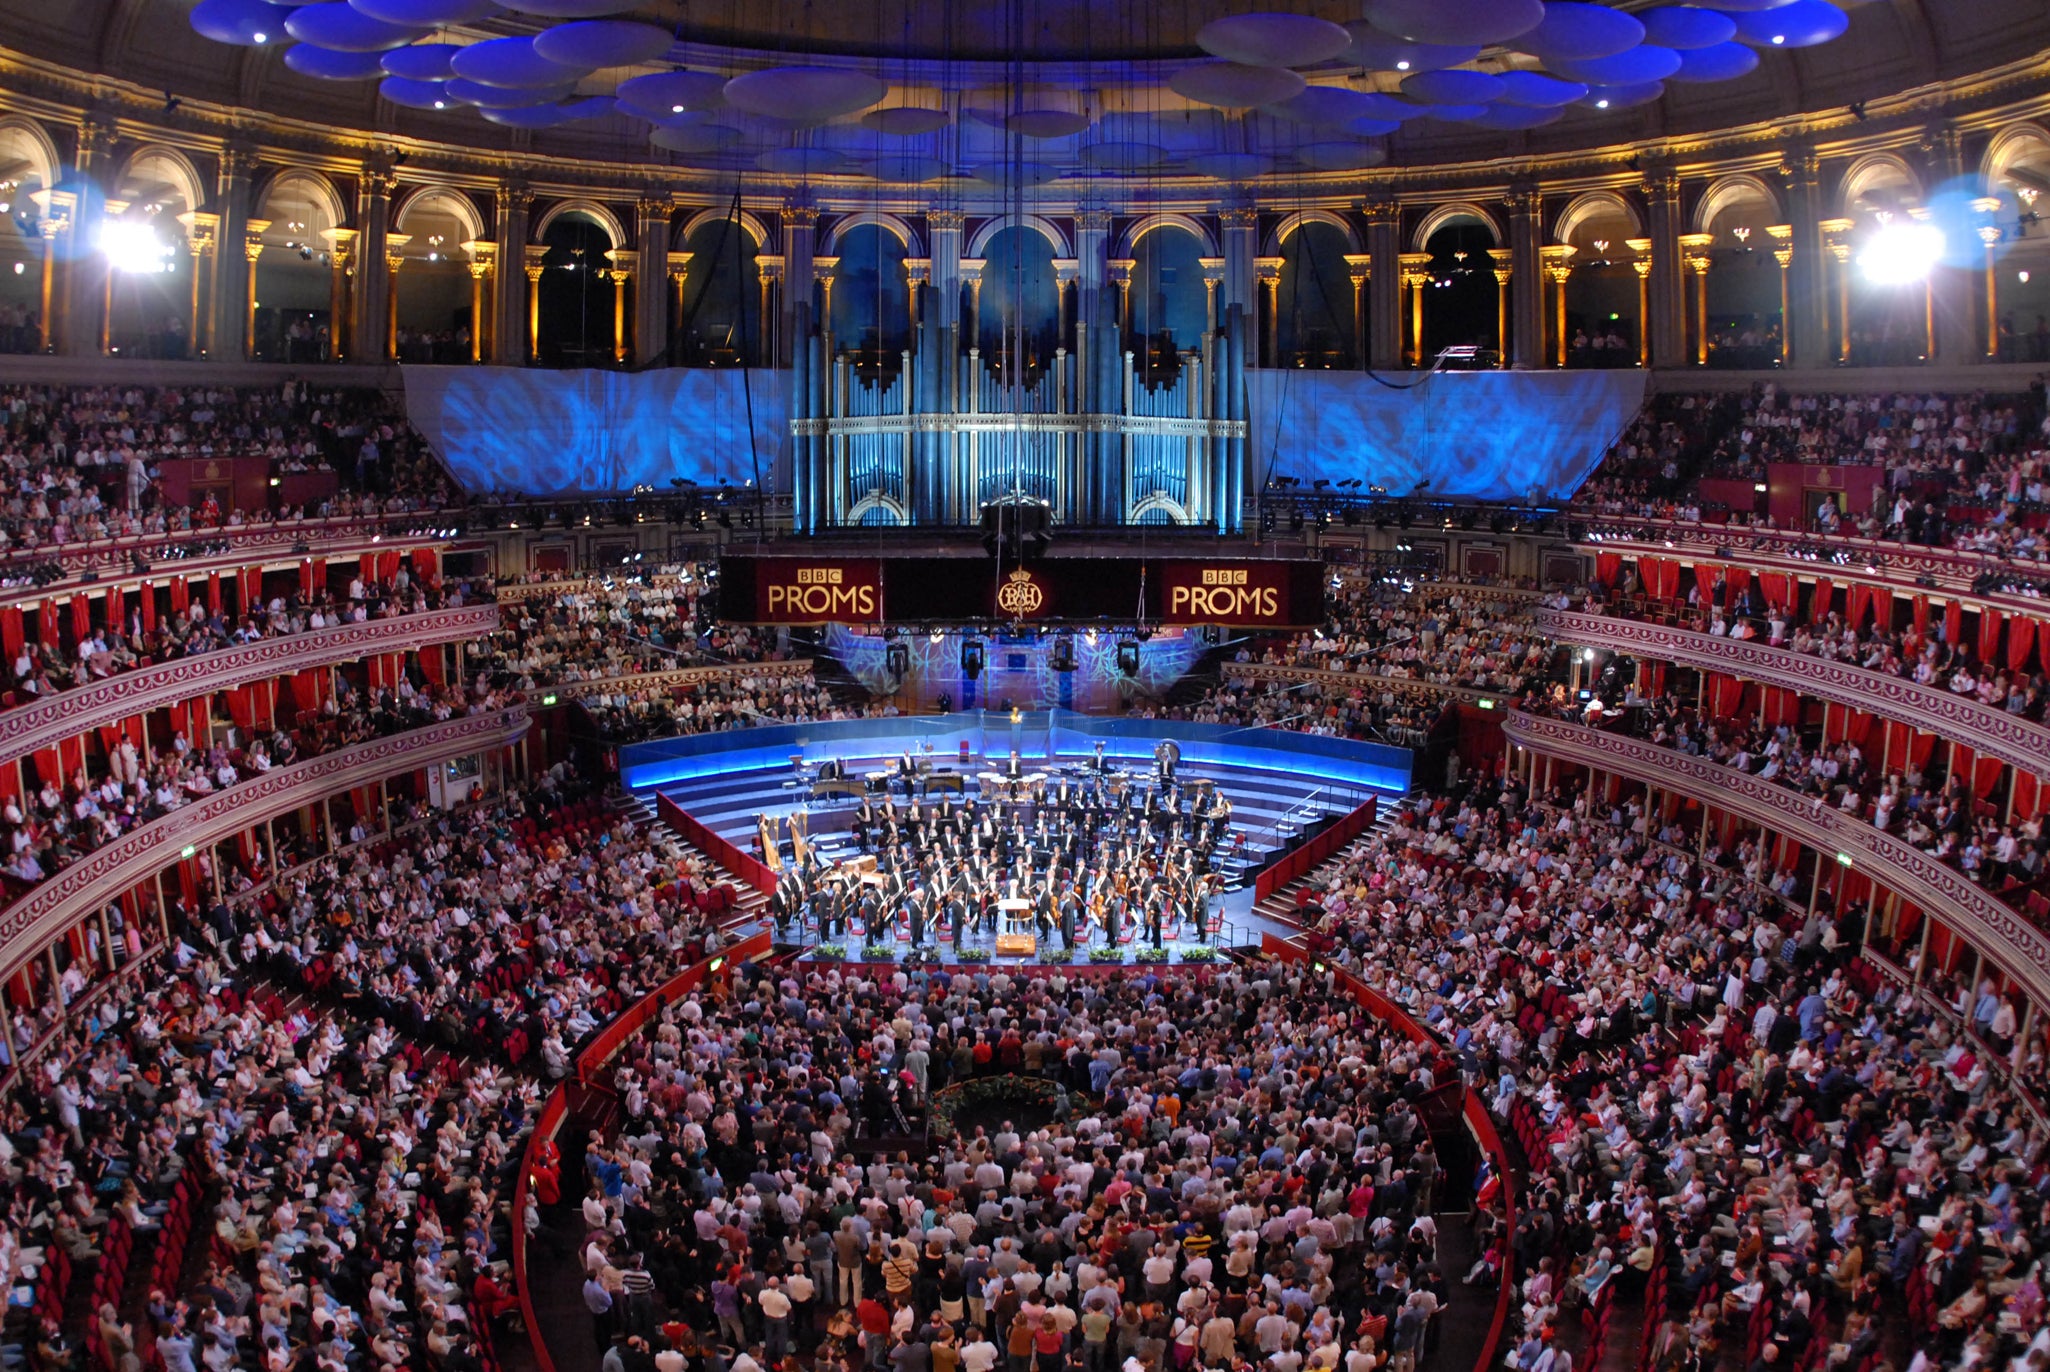 Classical appeal: The Royal Albert Hall remains the Proms’ spiritual home